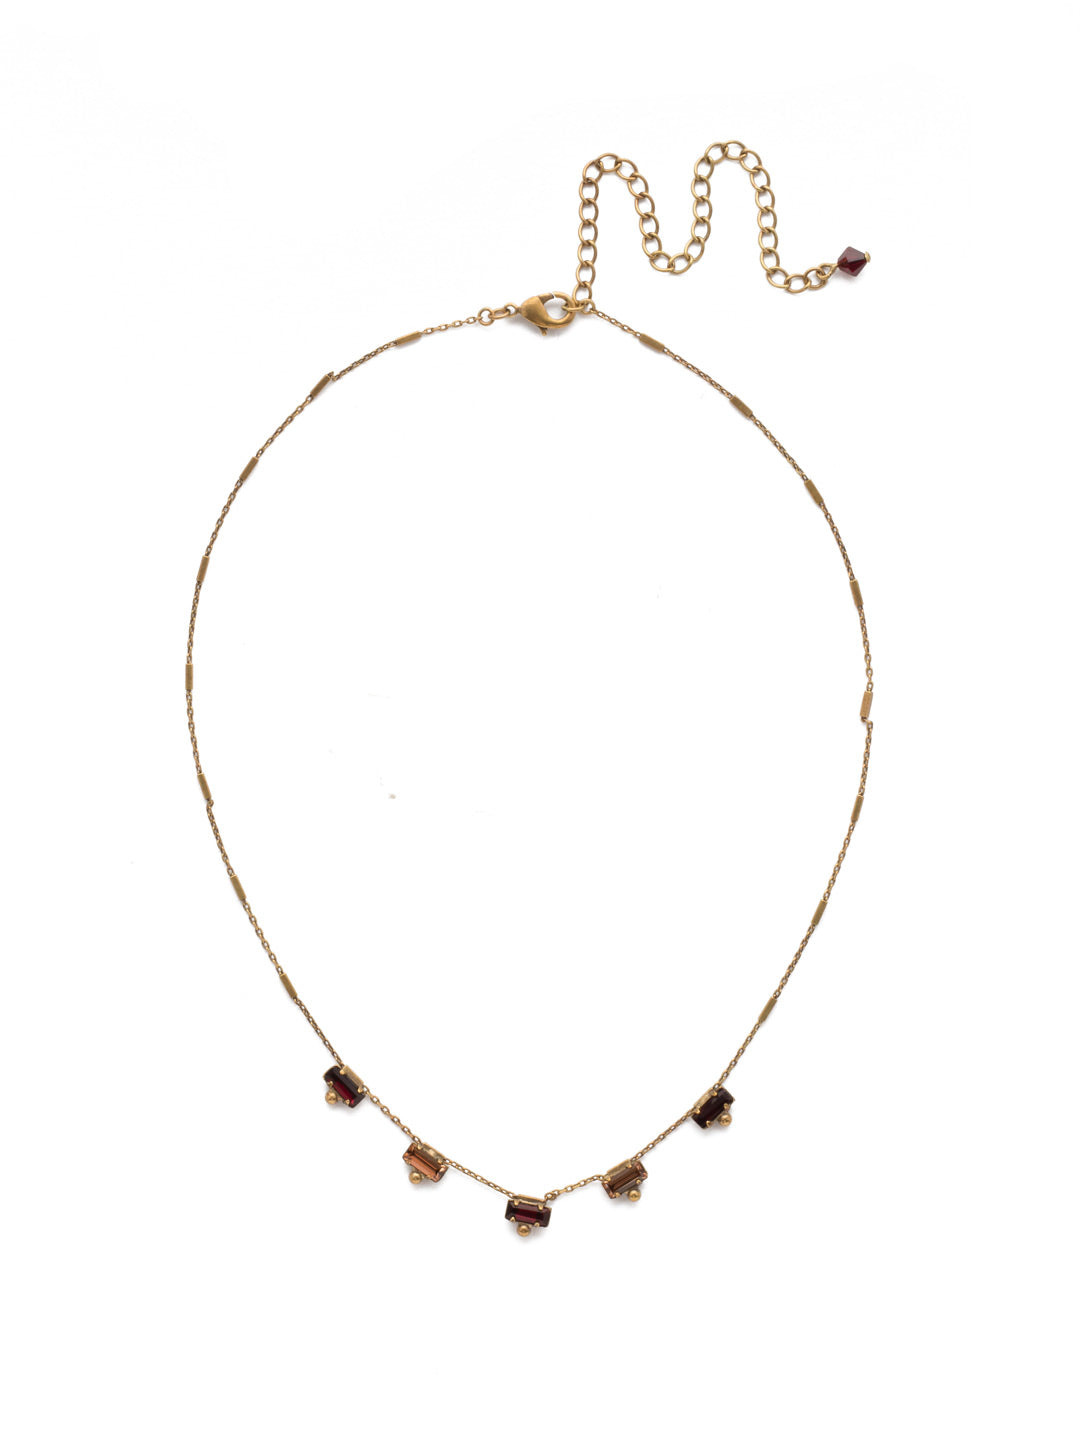 Shine and Dash Tennis Necklace - NDM17AGMMA - Beautifully faceted baguette crystals set in rectangular row offer simple styling that will add a pop of sparkle to your look.